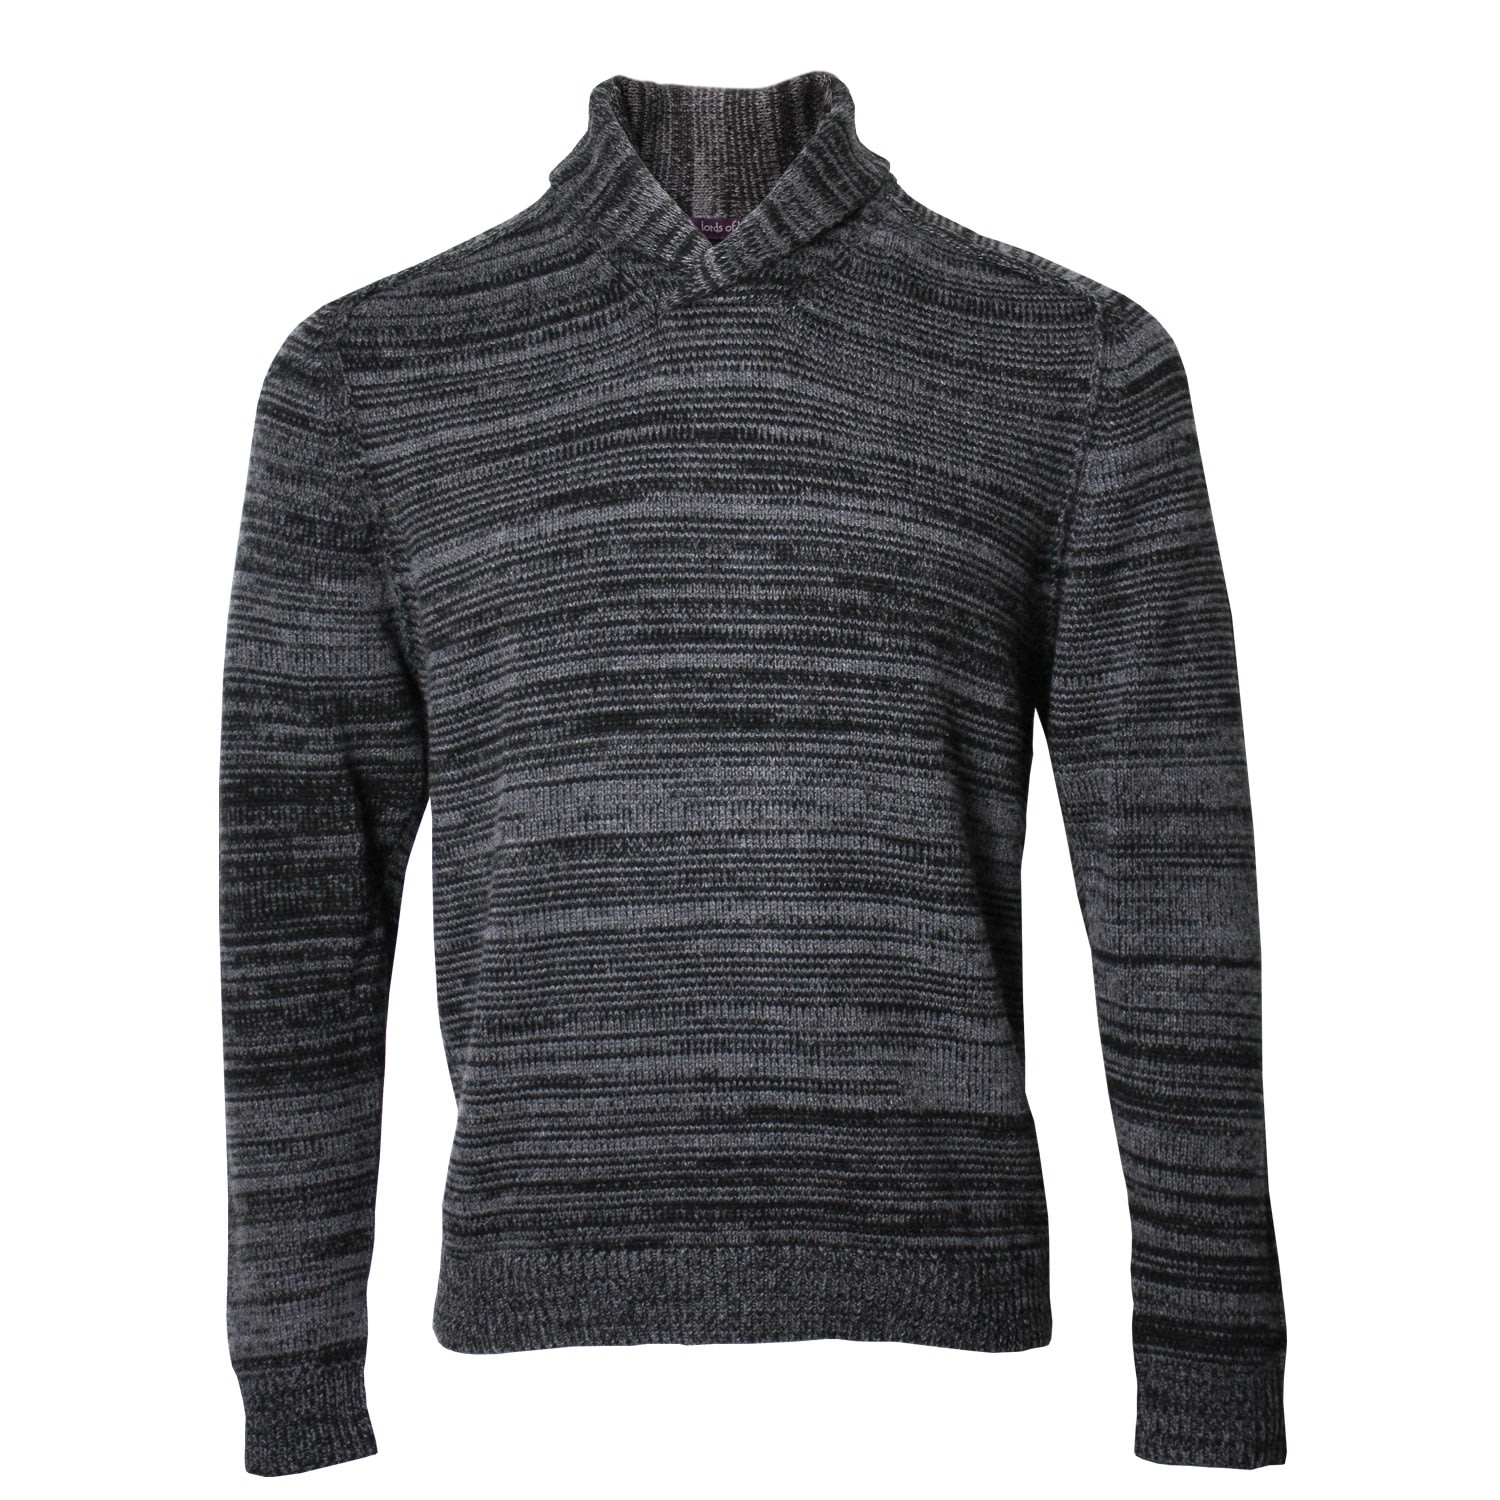 Men’s Black / Grey Sweet Shawl Neck Sweater In Charcoal Medium Lords of Harlech